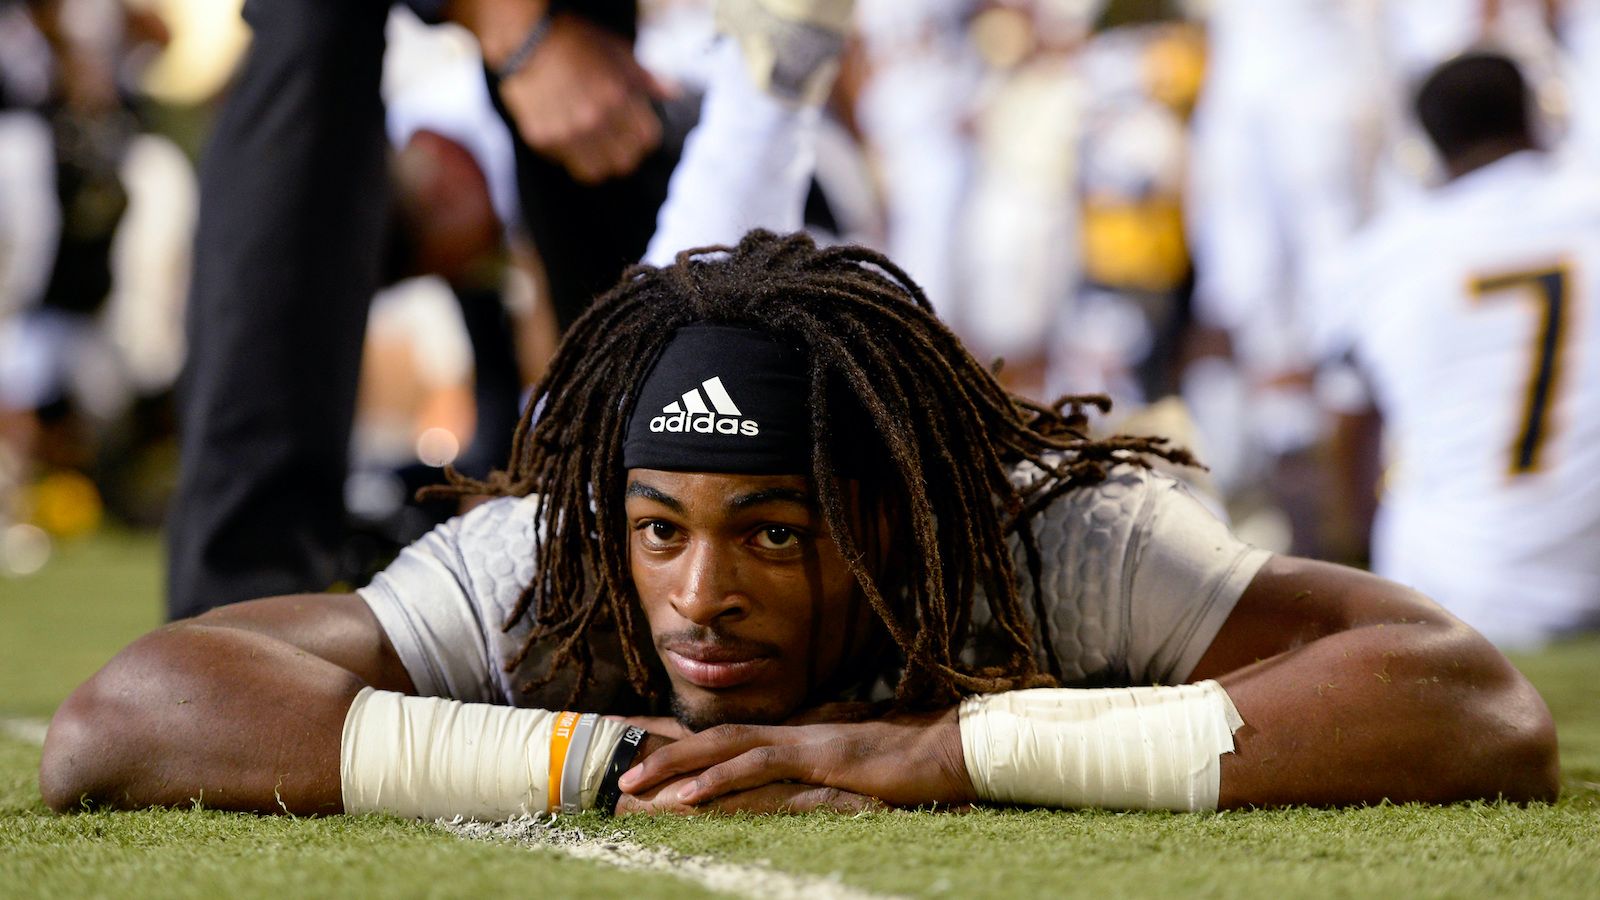 Breaking away: Najee Harris escaped troubled past with desire and lots of help